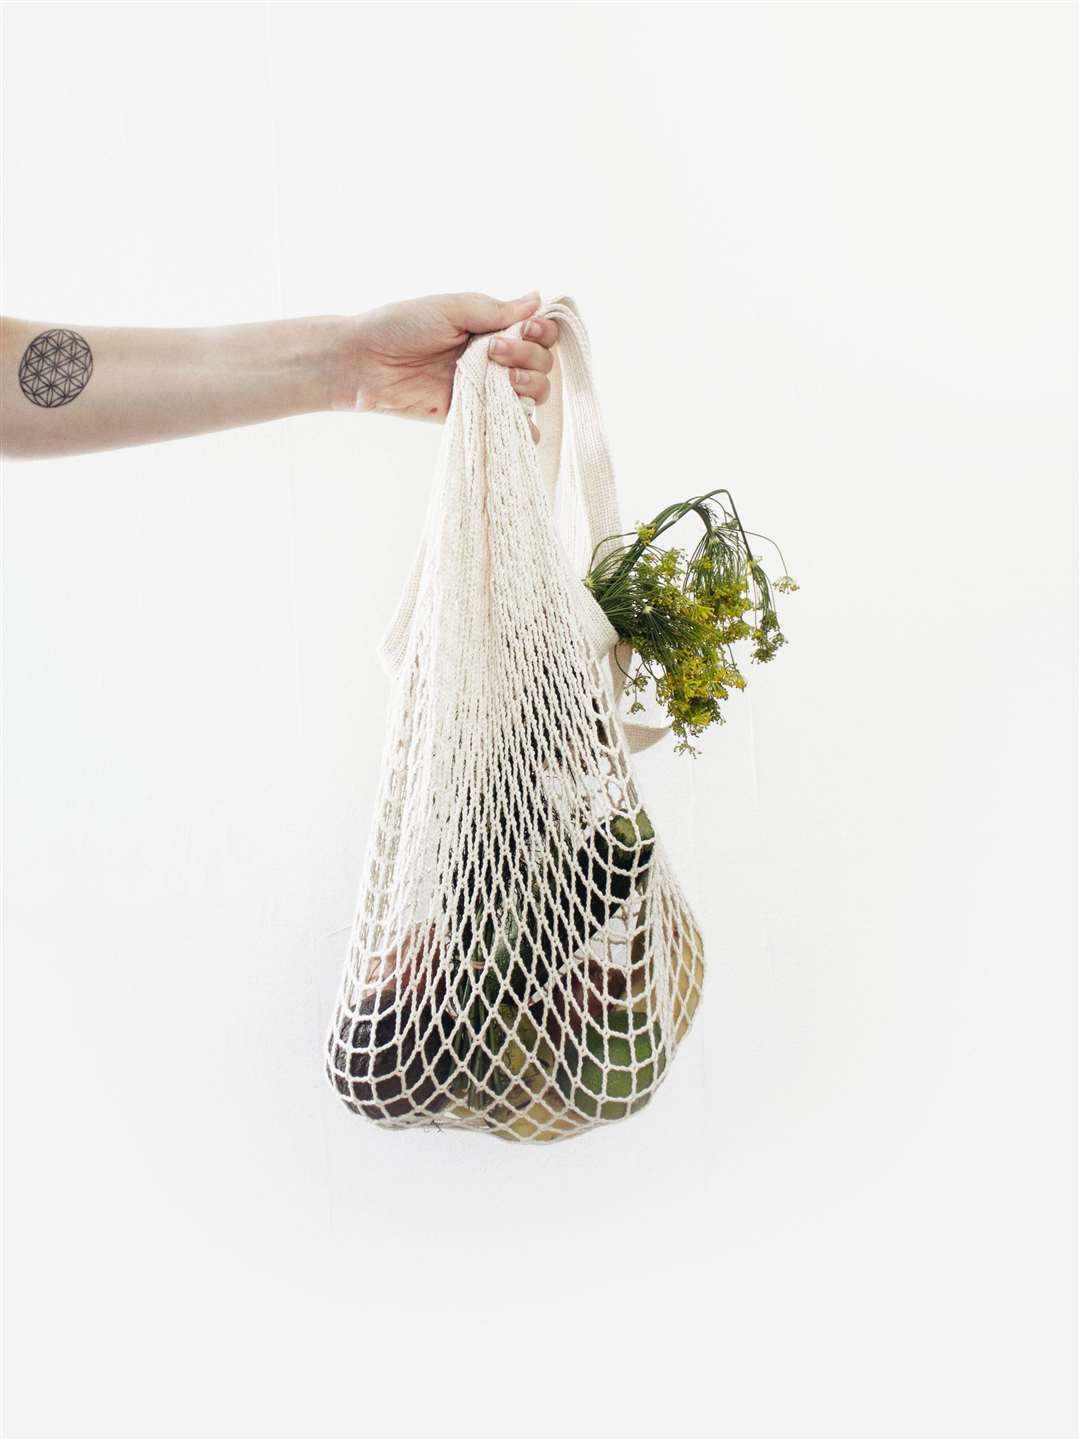 There is a need to seek reusable alternatives to plastic carrier bags